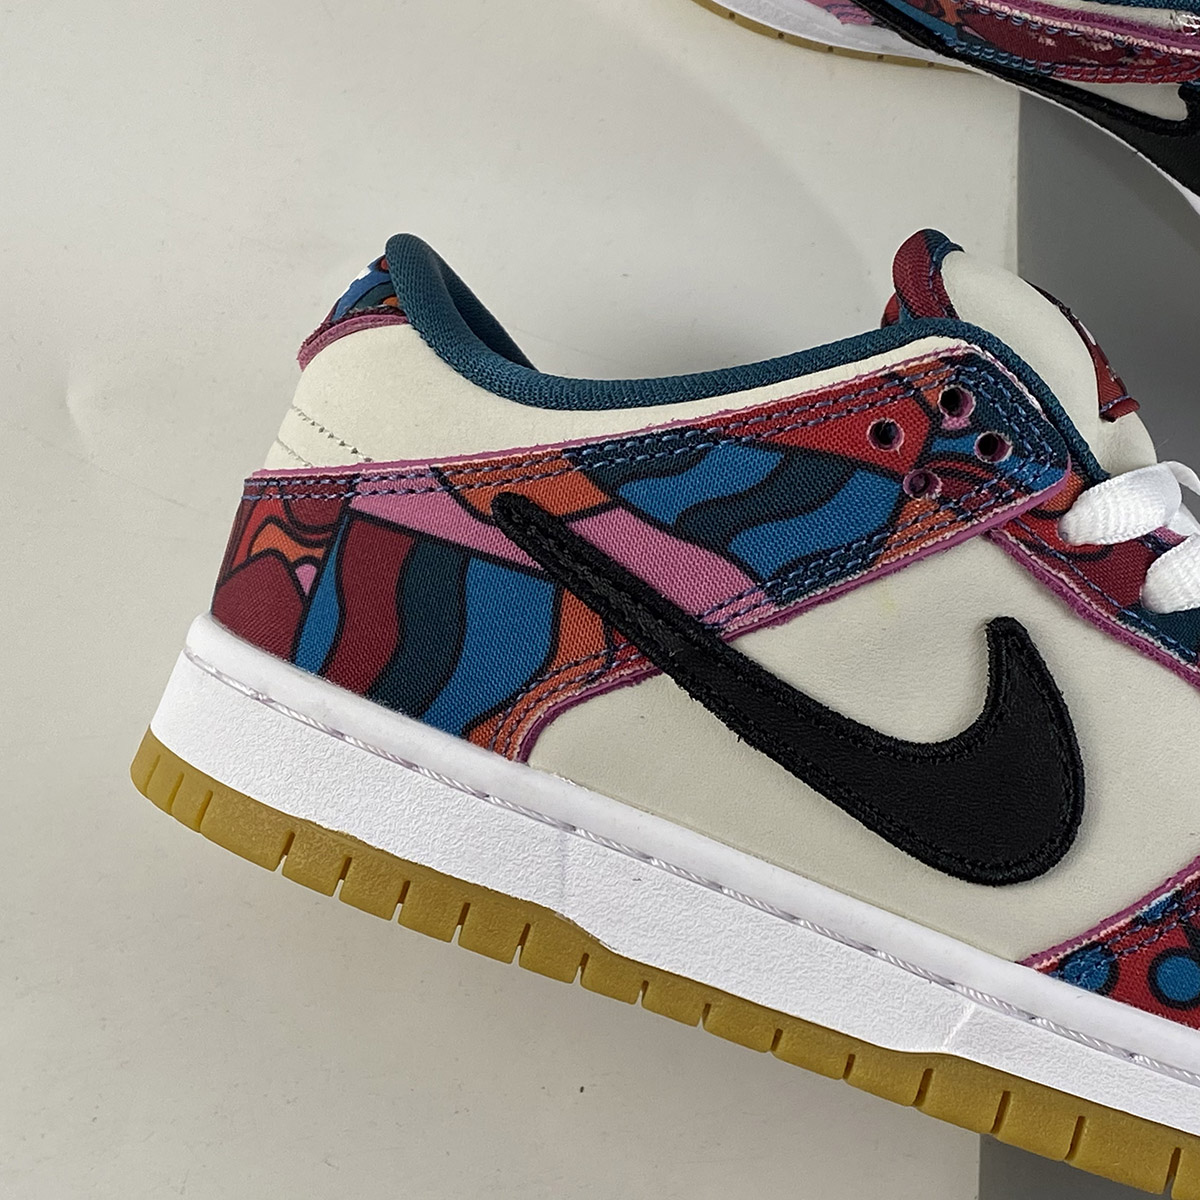 Parra x Nike SB Dunk Low “Abstract Art” Fireberry/Black For Sale – The ...